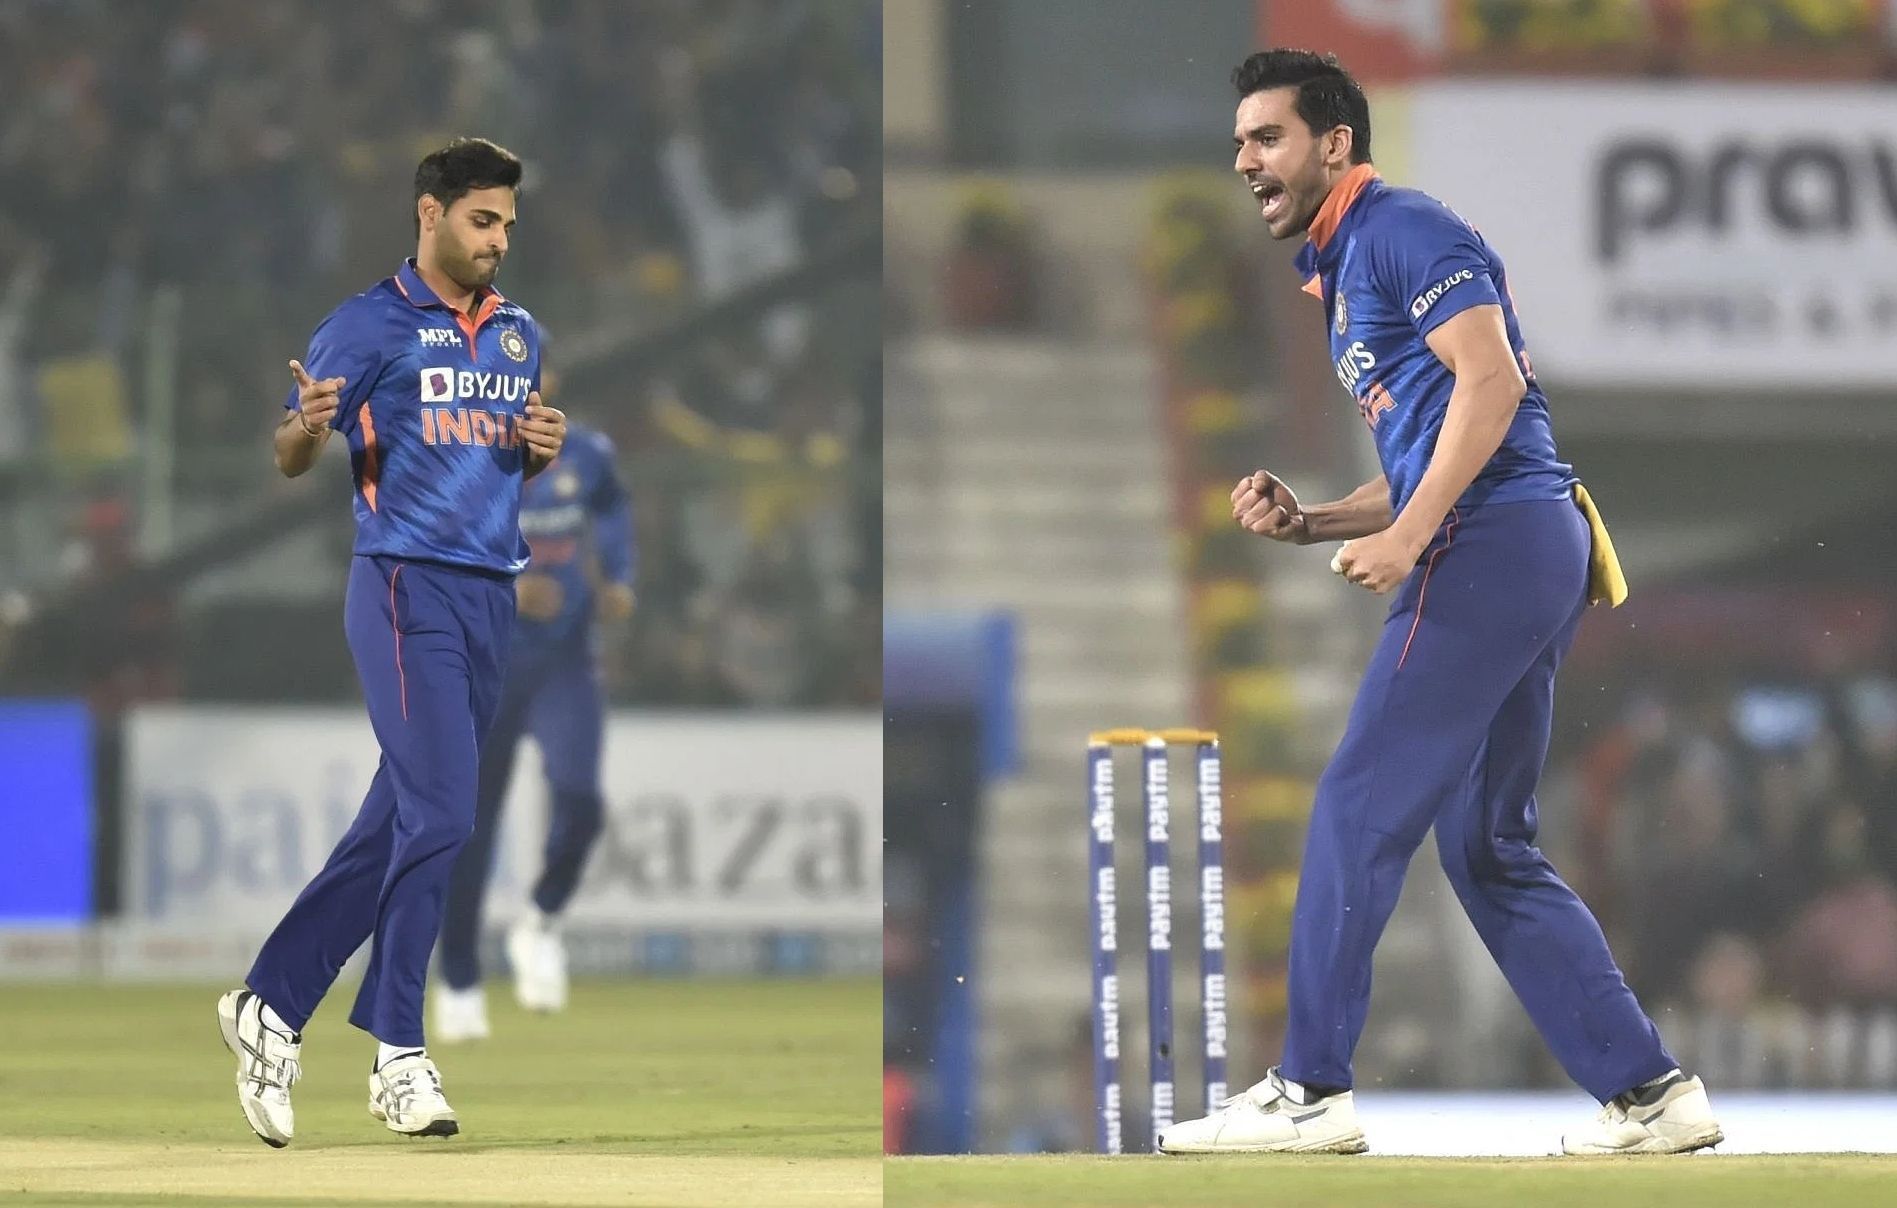 Bhuvneshwar Kumar and Deepak Chahar are known for their ability to swing the new ball